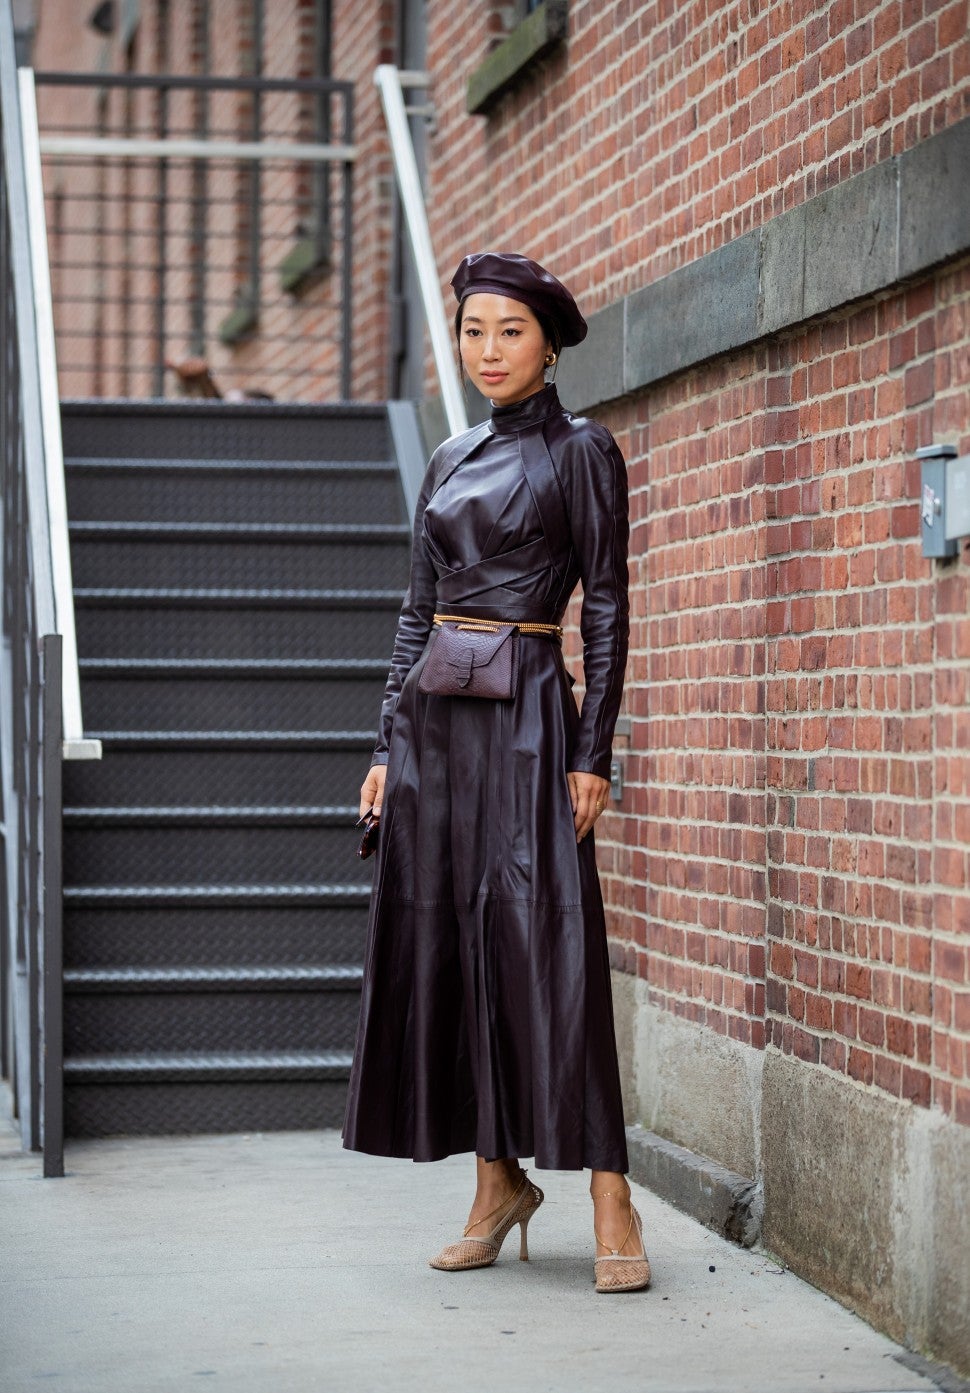 Aimee Song in leather outfit at NYFW street style